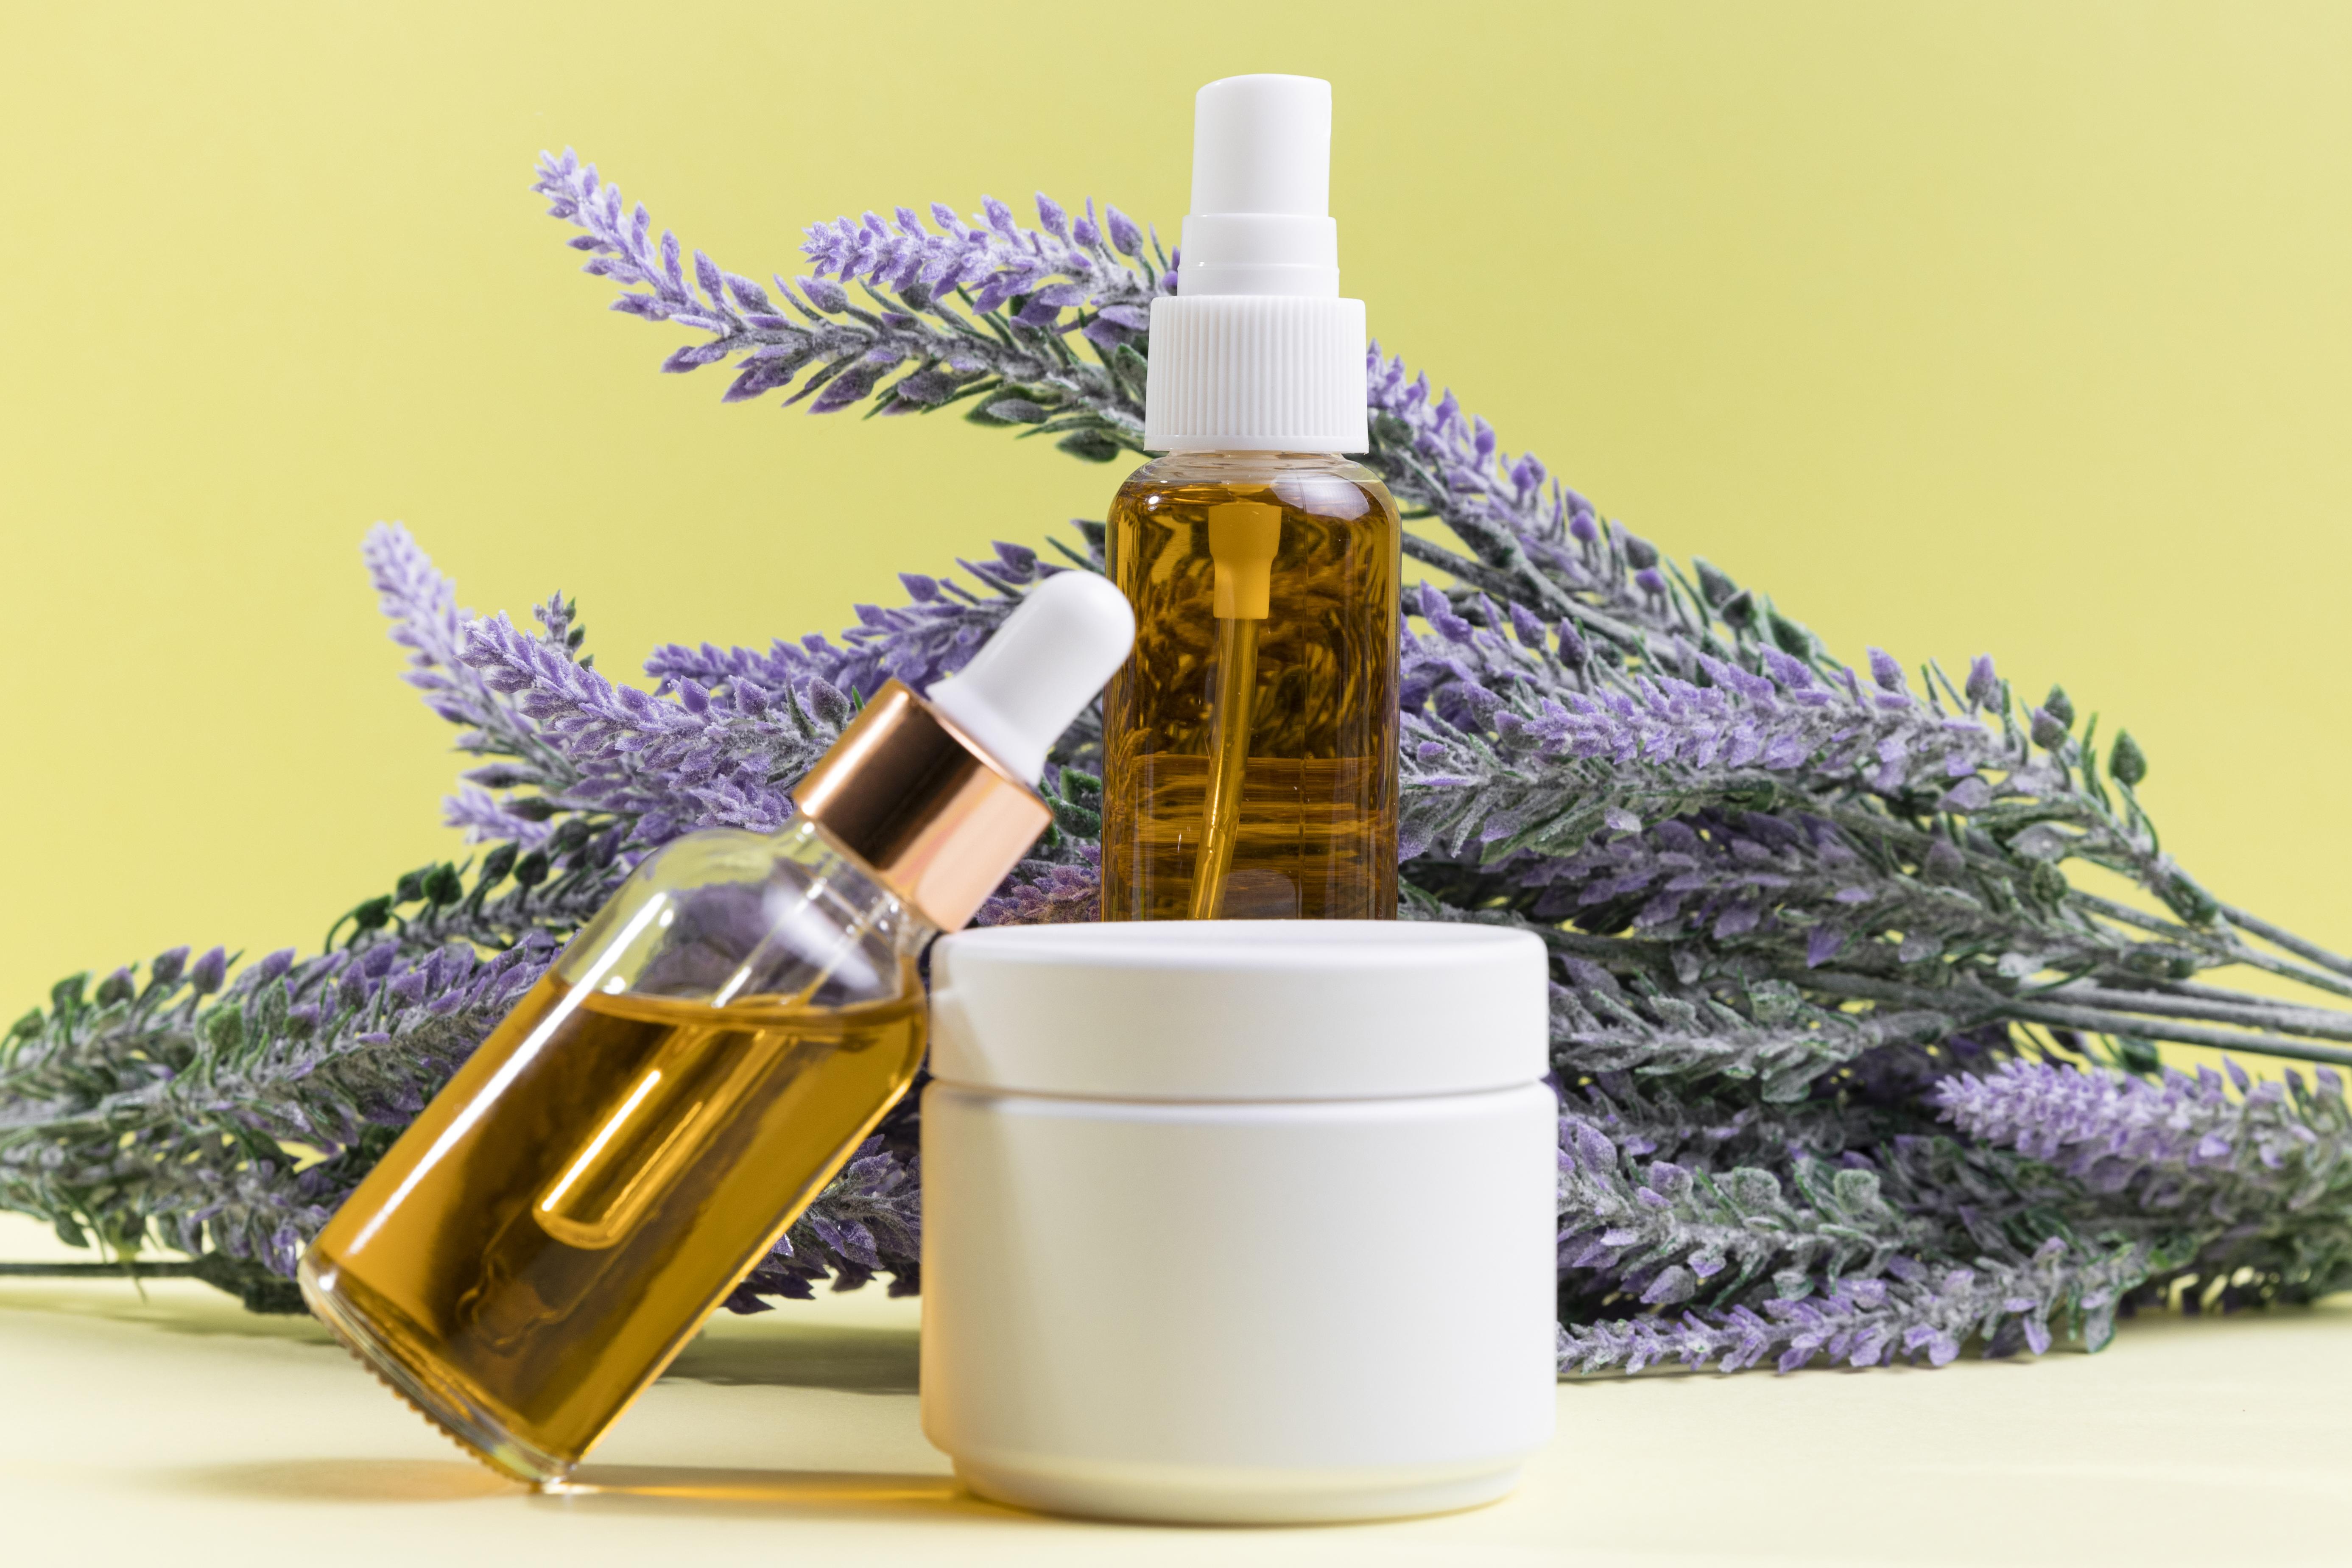 What Are The Benefits Of Lavender Essential Oil?